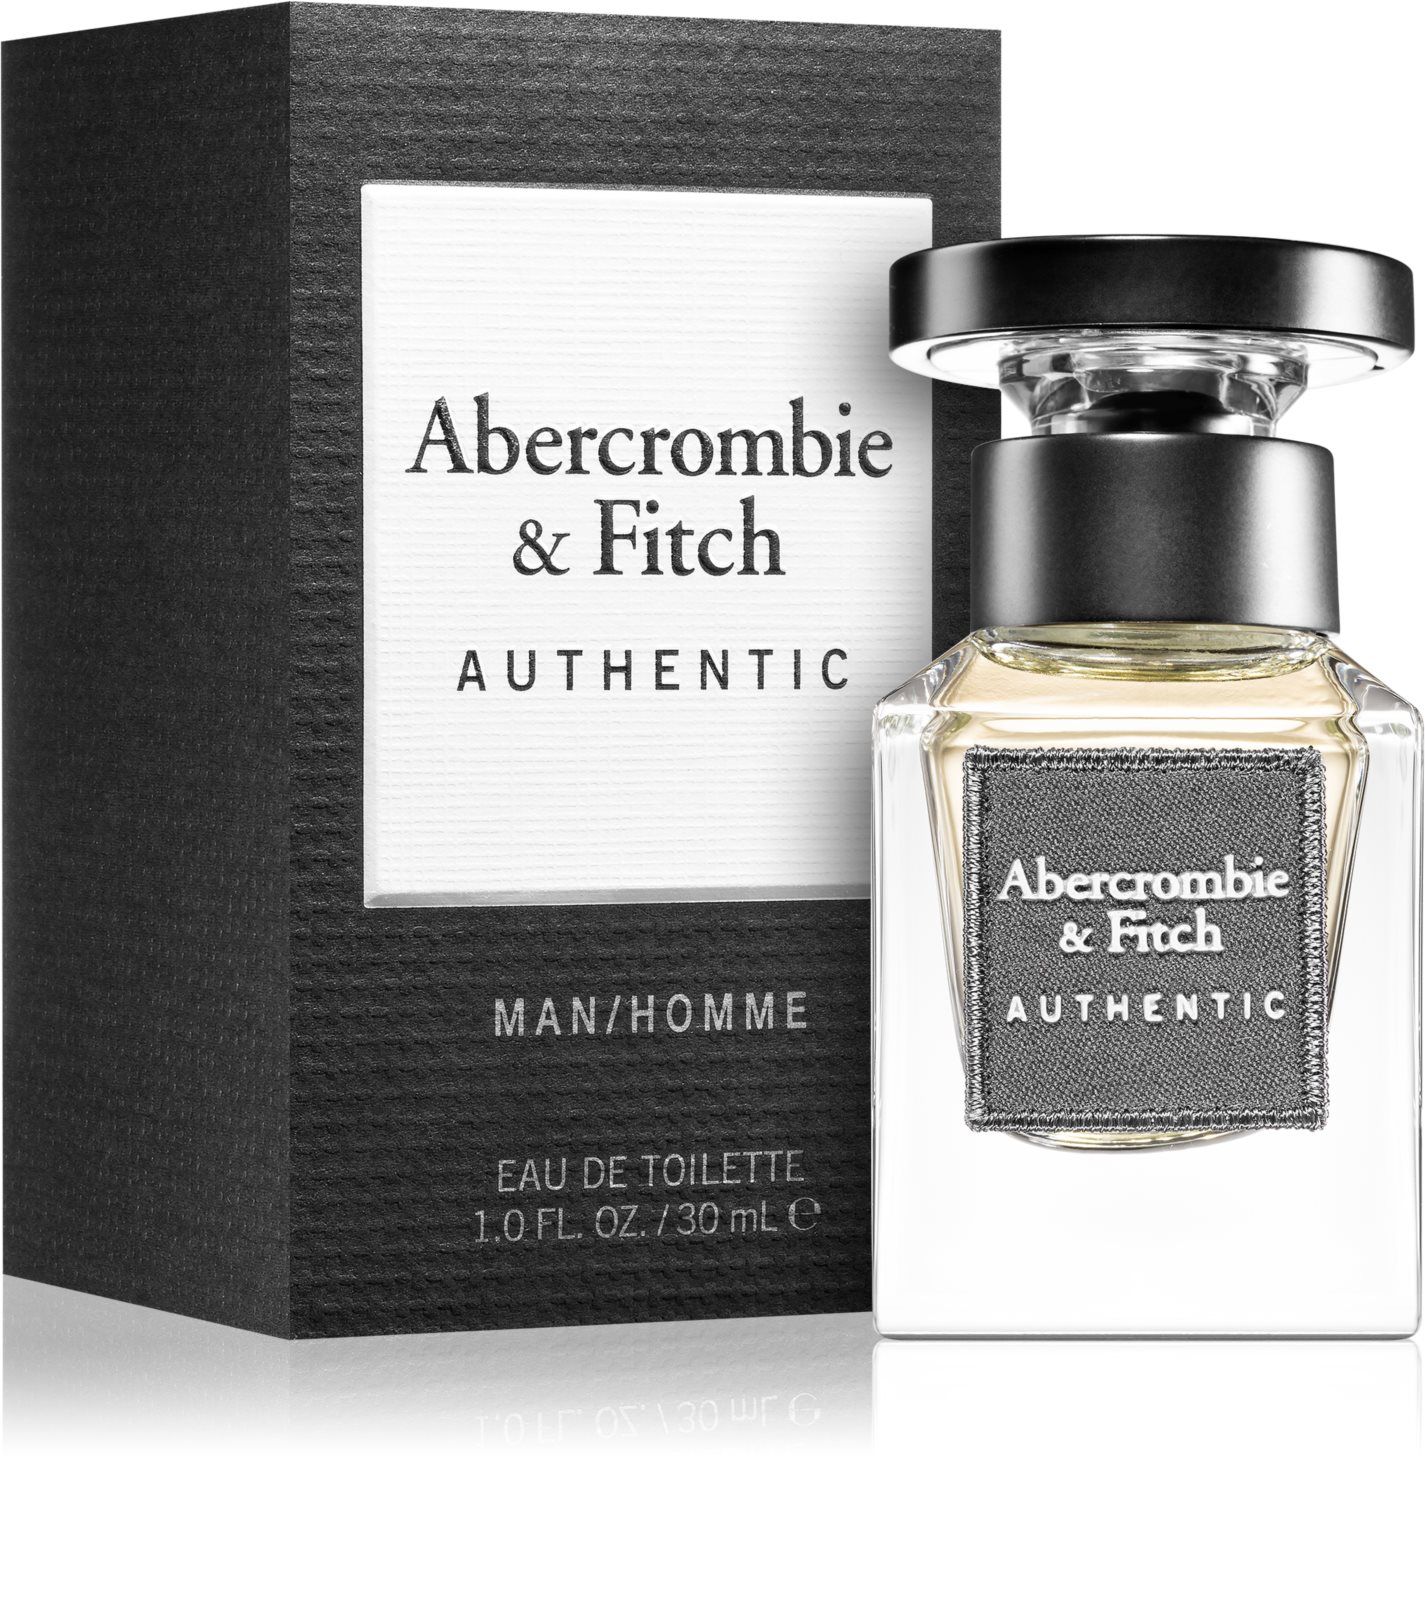 Abercrombie & Fitch authentic 30 мл. Духи Abercrombie Fitch authentic 30 мл. Abercrombie & Fitch authentic man EDT 50ml. Abercrombie & Fitch authentic man (EDT) 50мл. Authentic туалетная вода